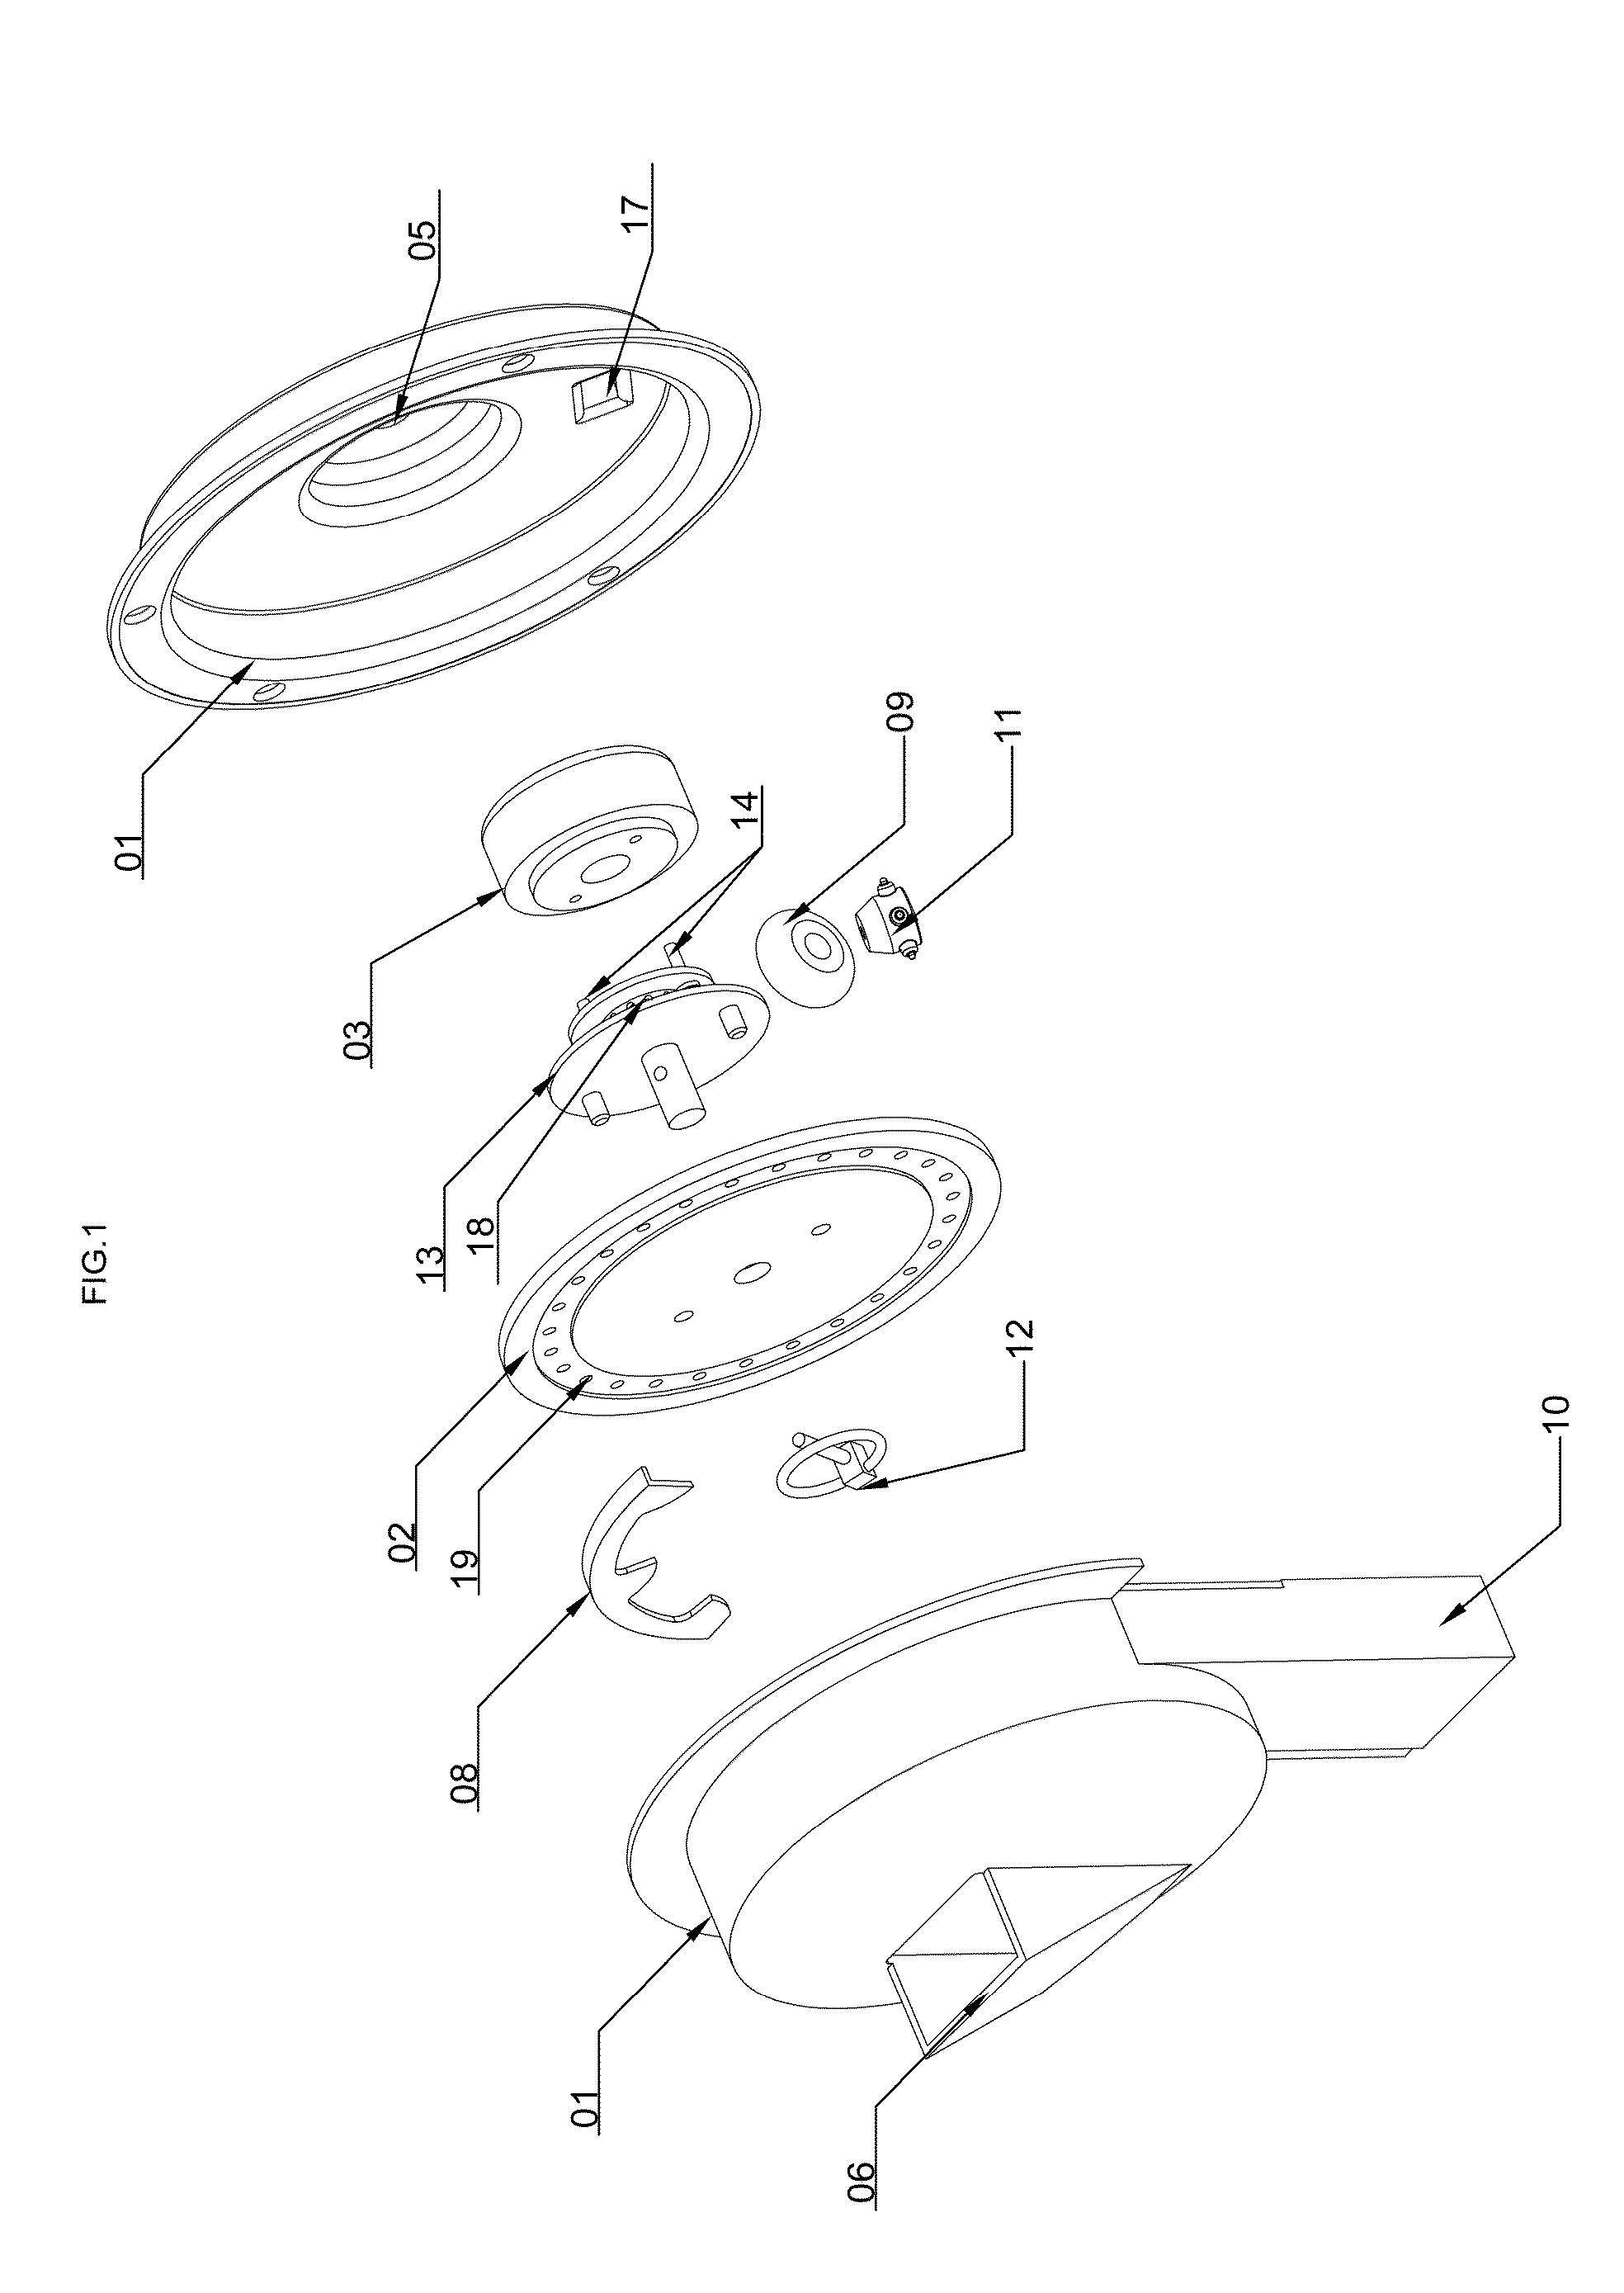 Direct drive seed metering device